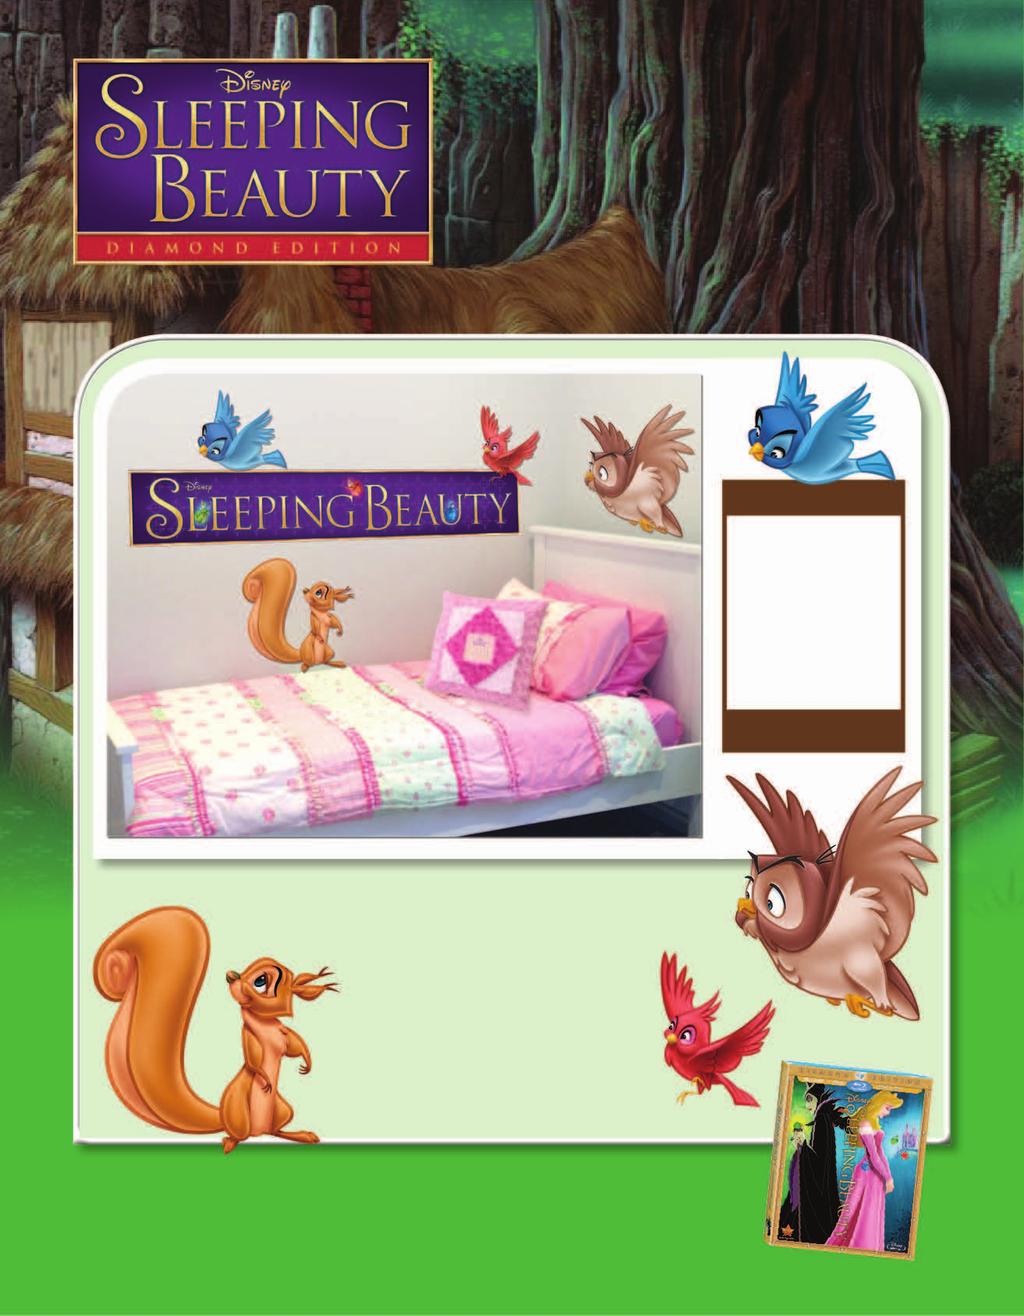 FORREST FRIENDS BEDROOM DECALS Enchant your bedroom with Princess Aurora s Forrest Friends! YOU WILL NEED: Home laser or inkjet printer. Full page (8.